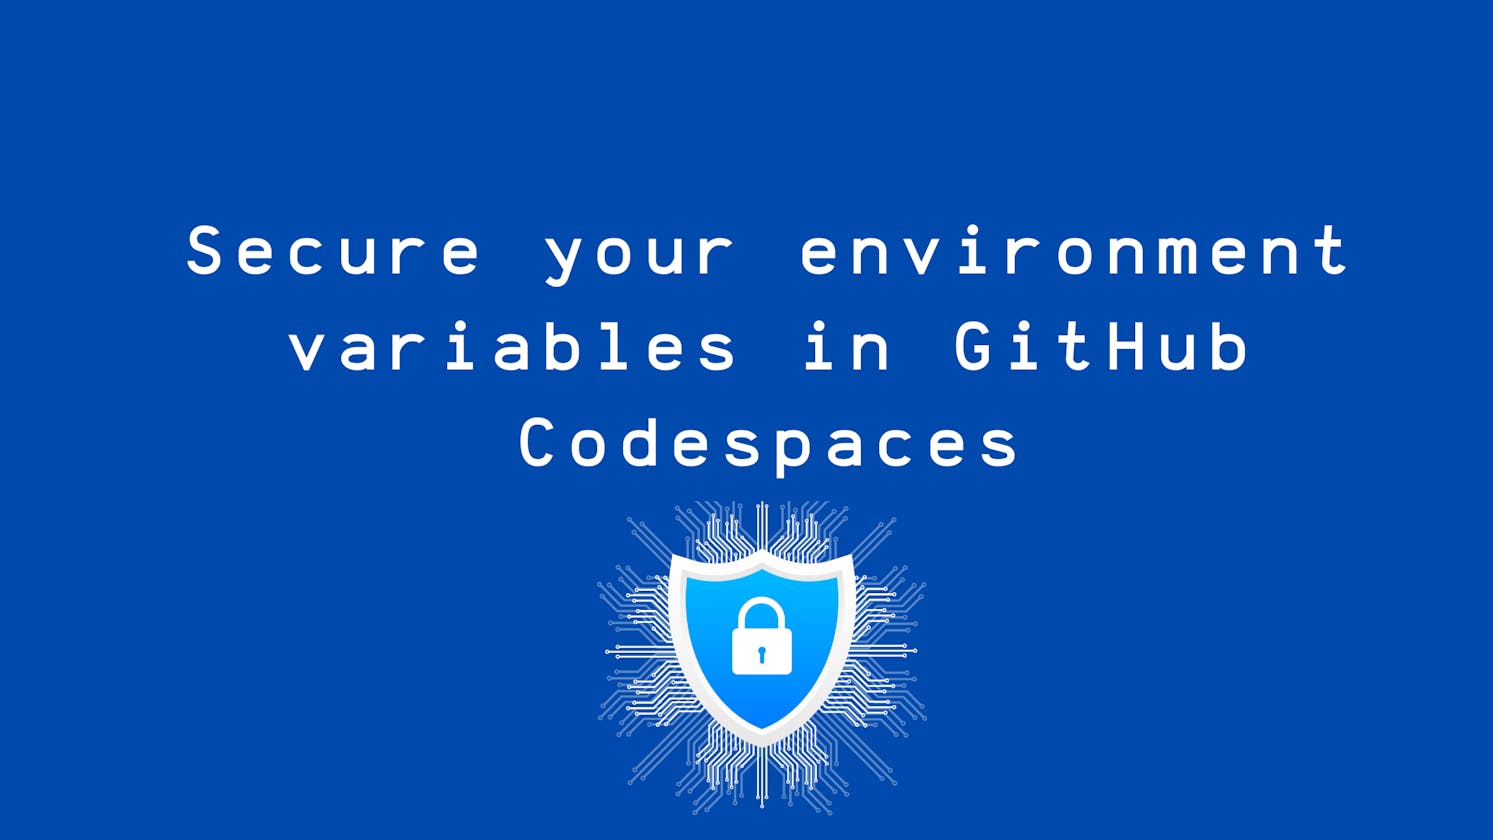 Securely store environment variables with GitHub Codespaces